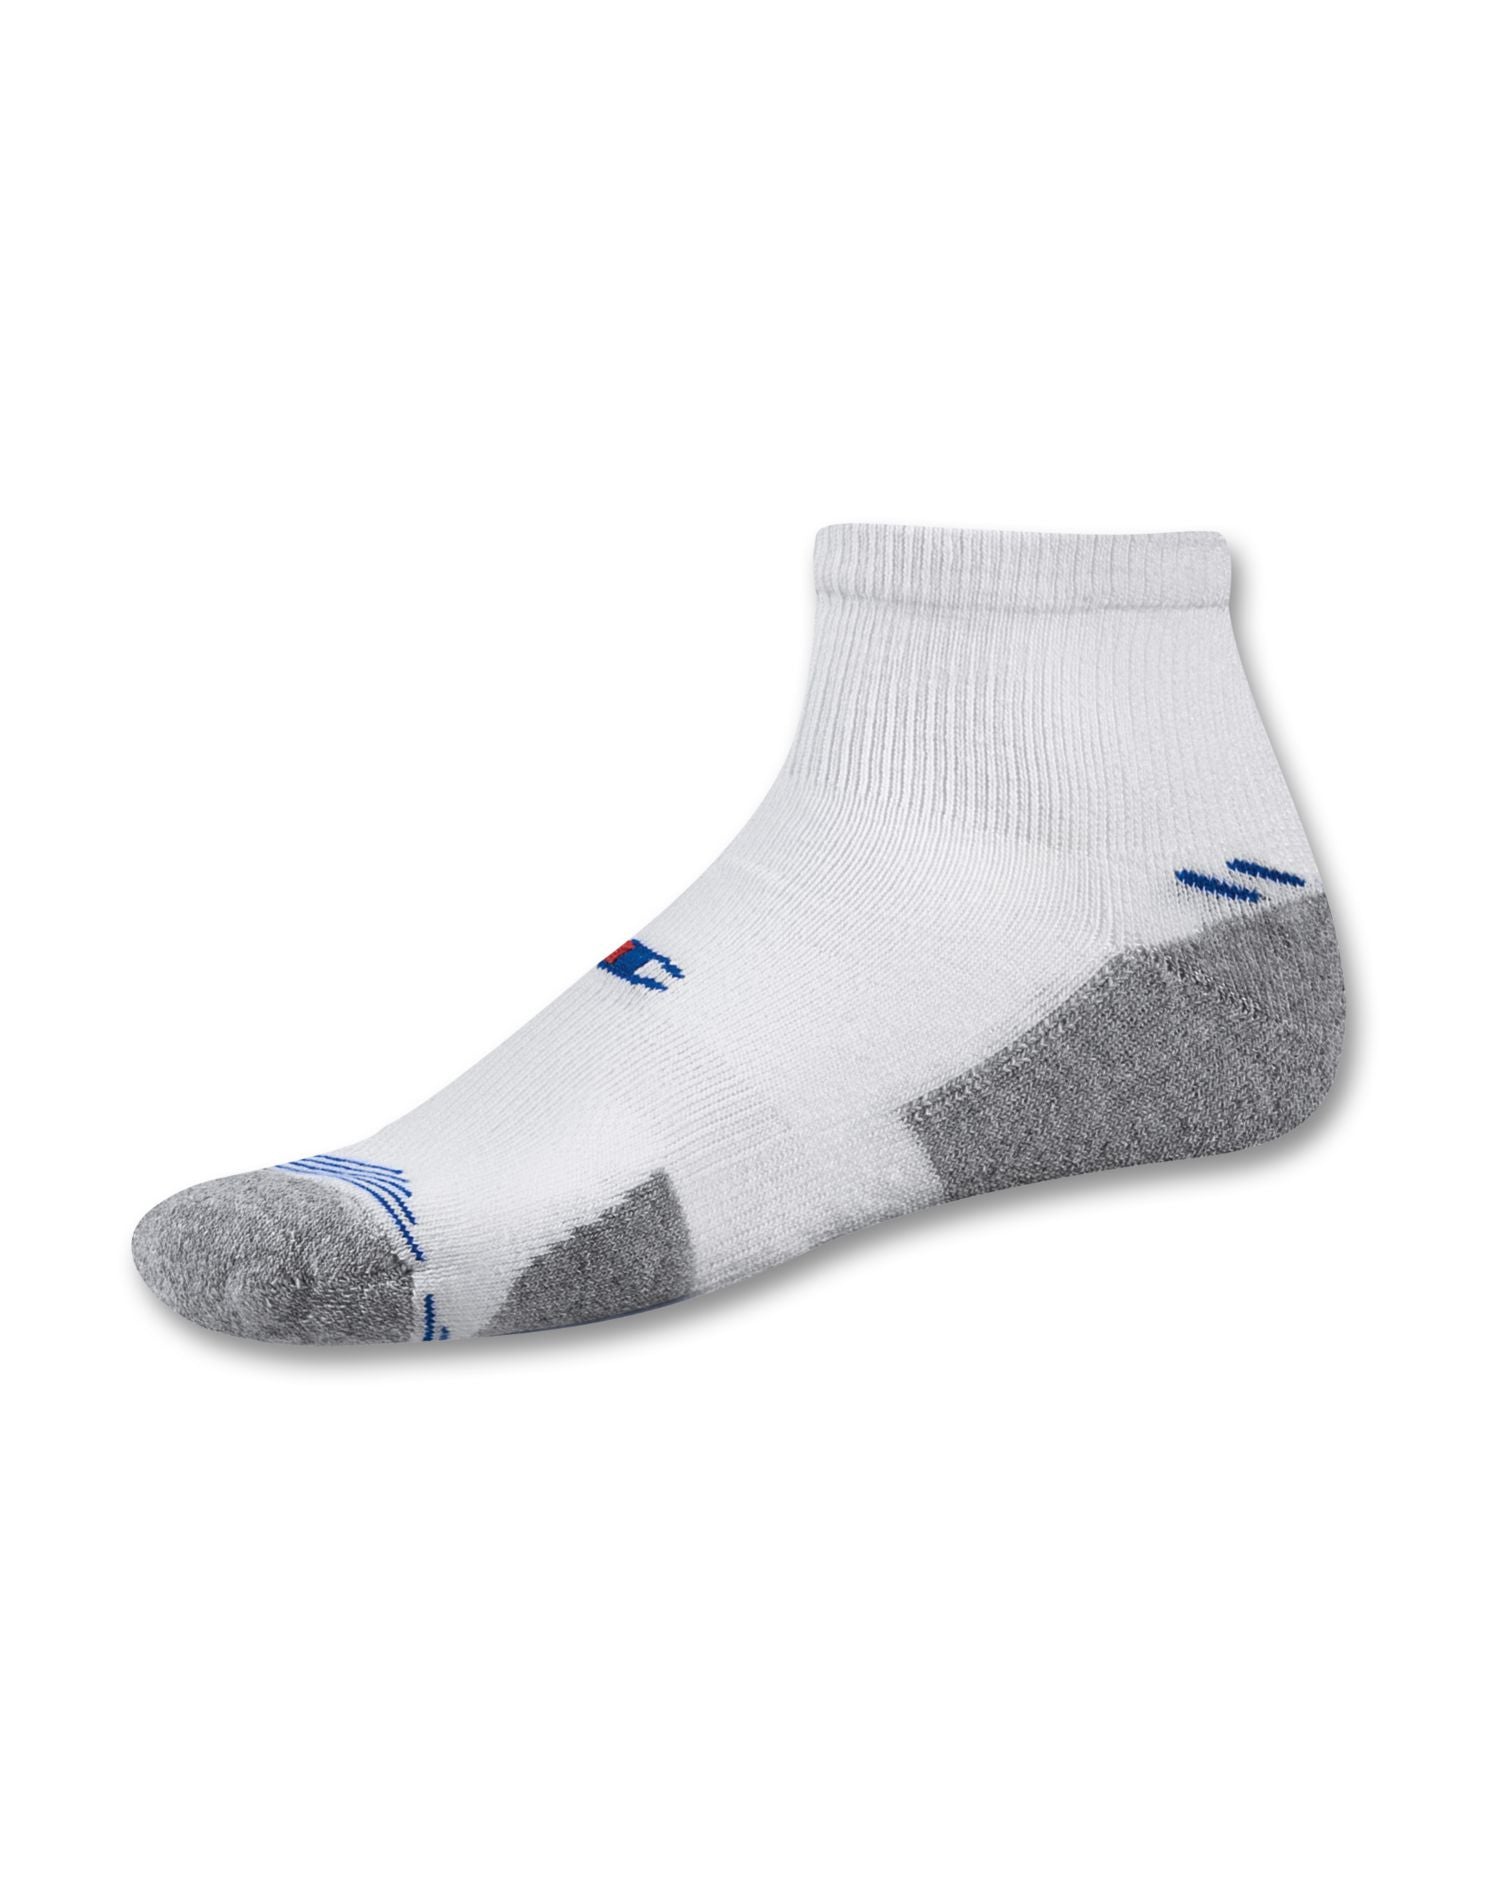 CH204 - Champion Double Dry High Performance Men's Ankle Socks 3-Pack